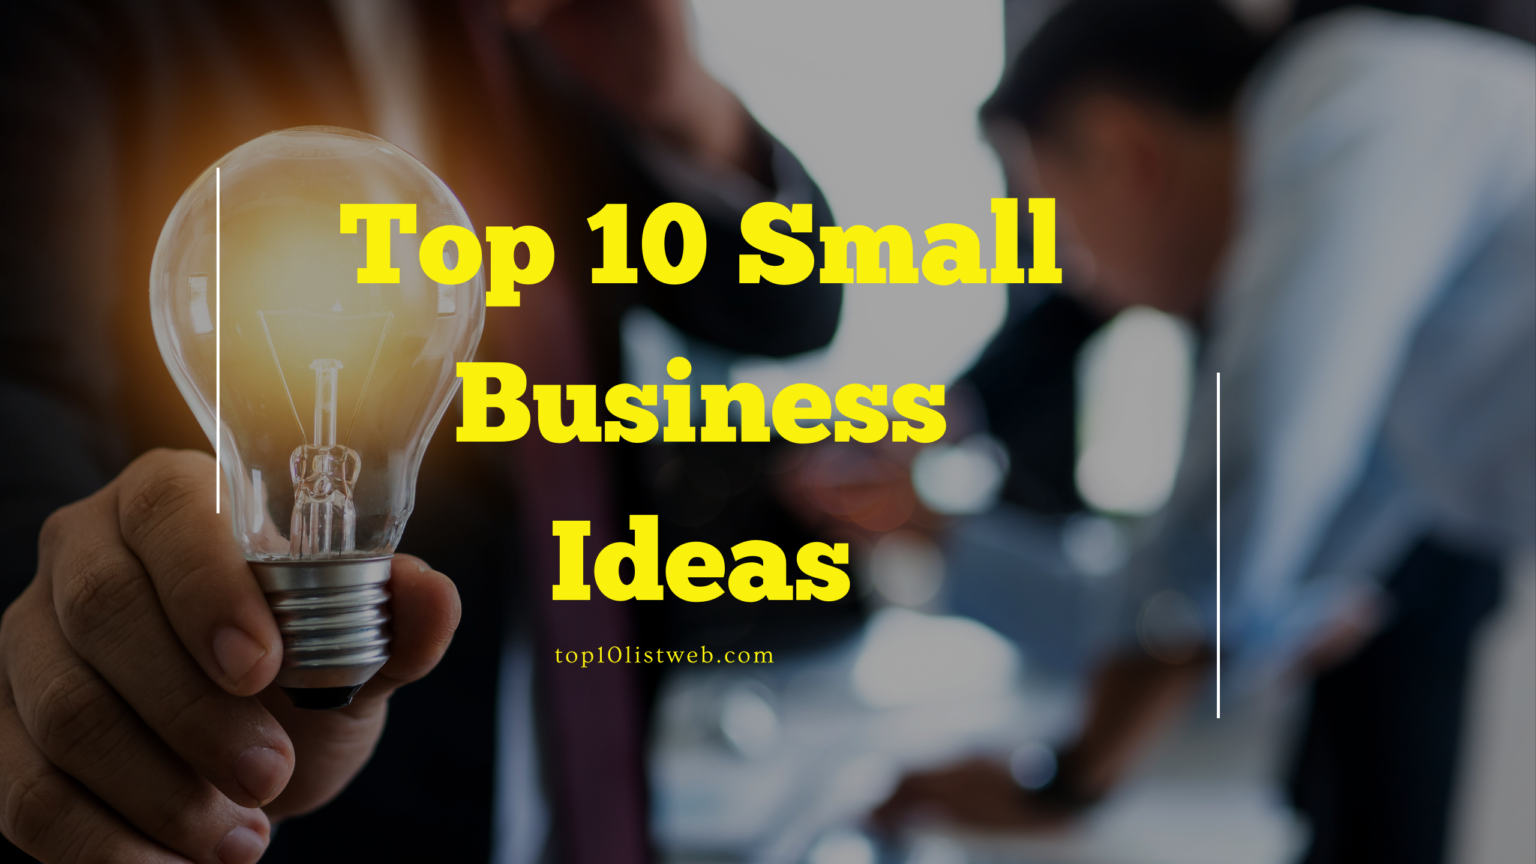 Top 10 Small Business Ideas